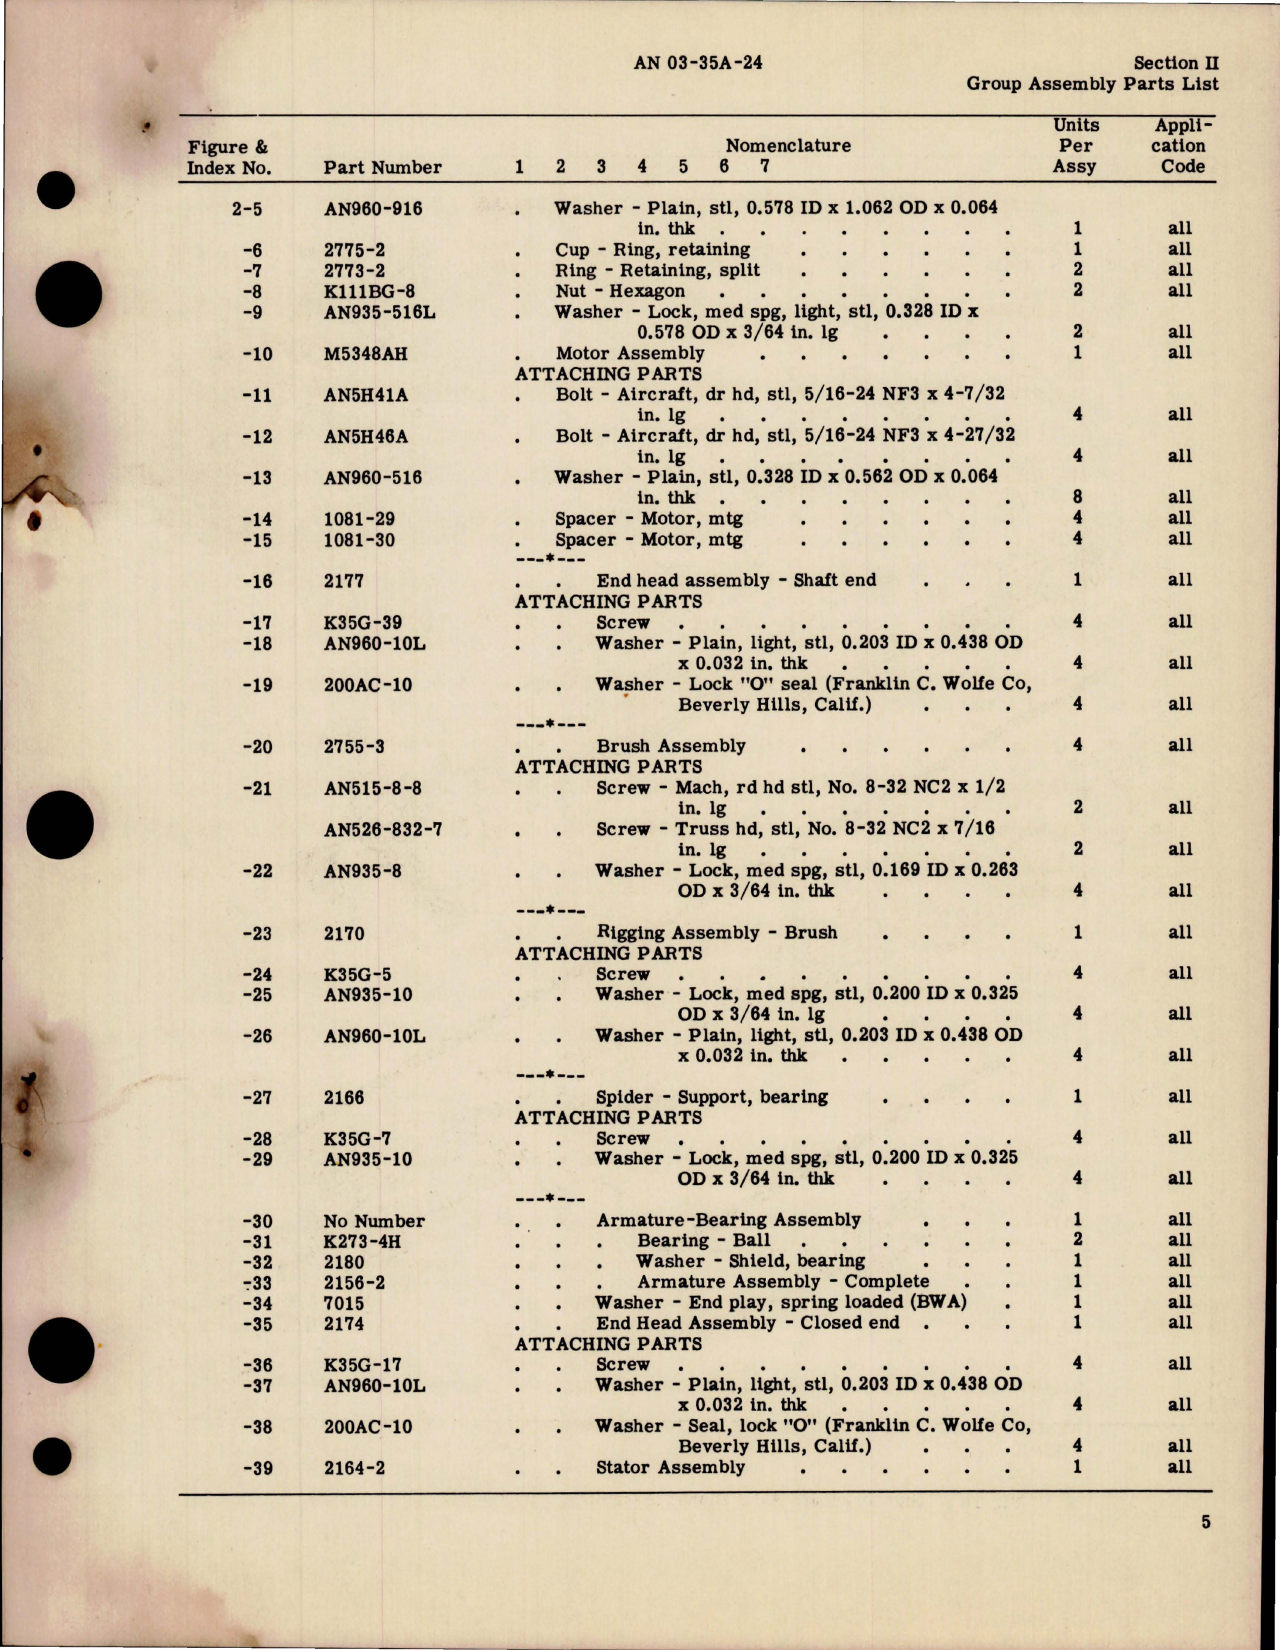 Sample page 7 from AirCorps Library document: Parts Catalog for Blower Assemblies 